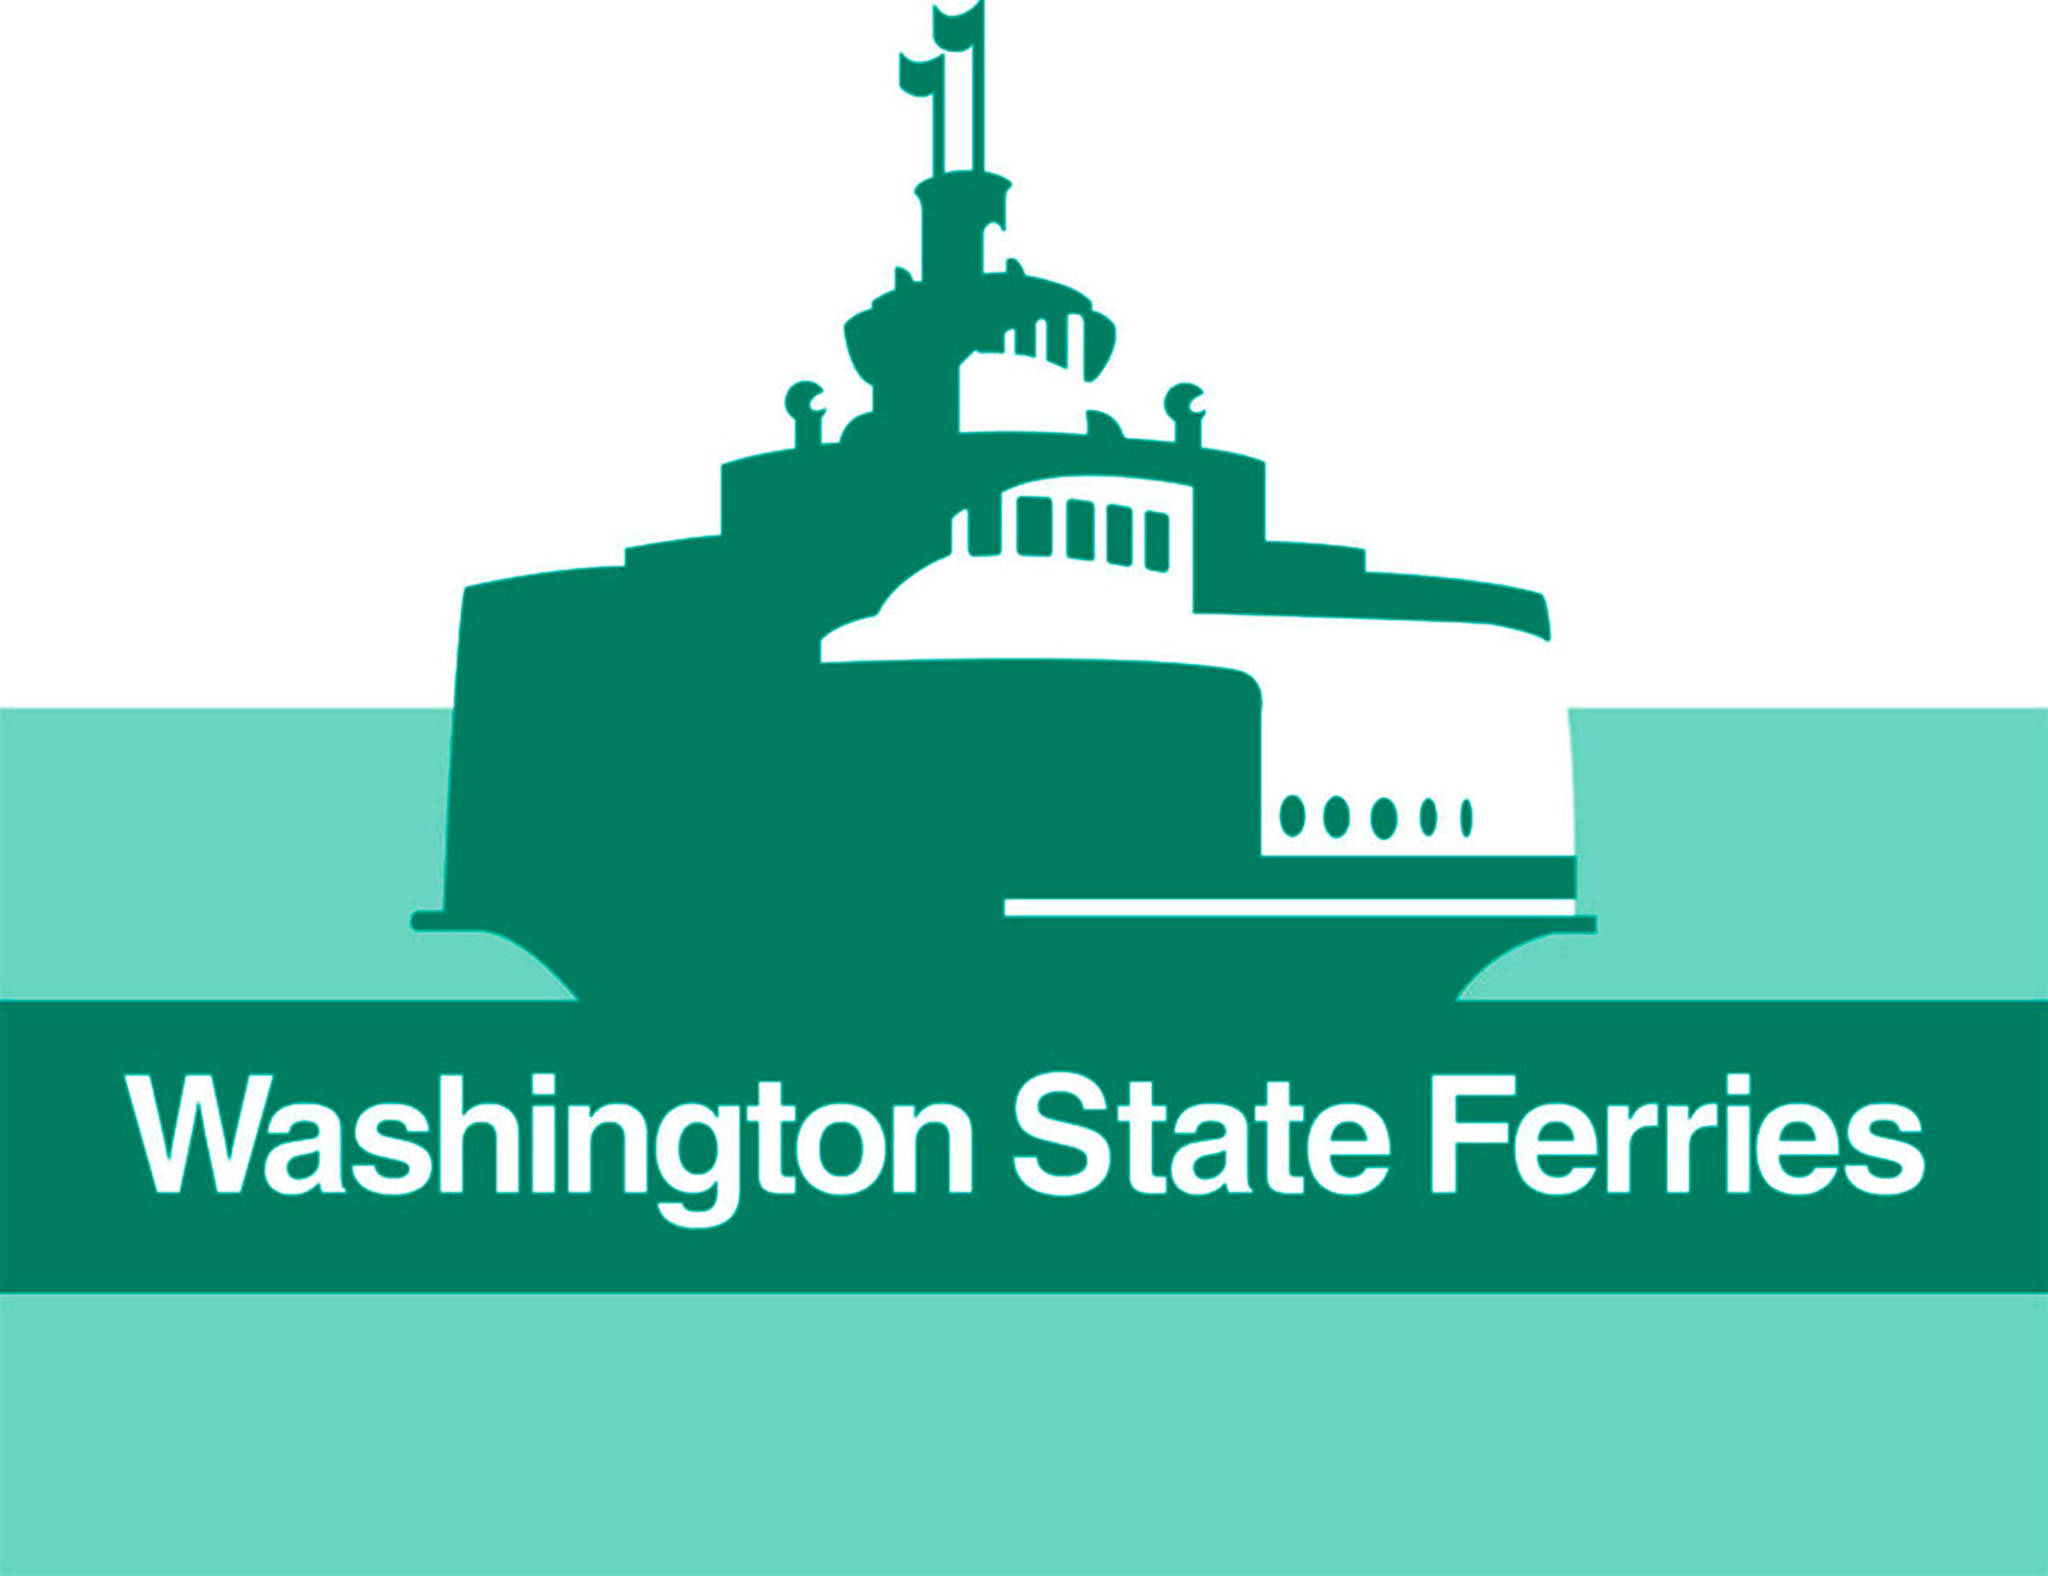 Smooth Sailings | How to ride the Washington State Ferries